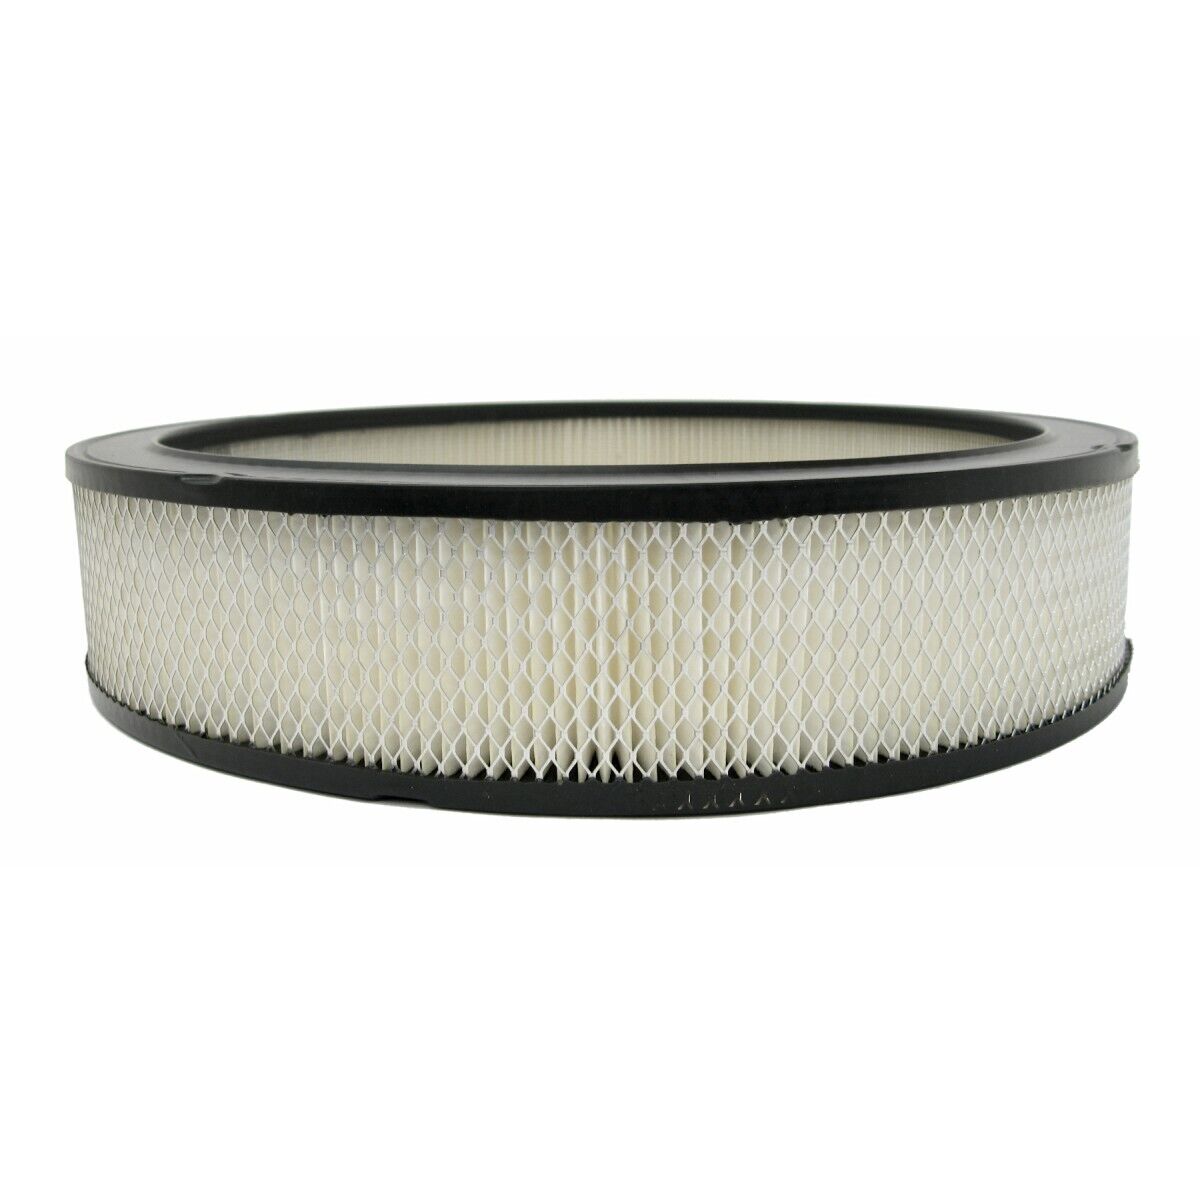 A212CW AC Delco Air Filter for Chevy Olds Le Sabre NINETY EIGHT Cutlass Malibu